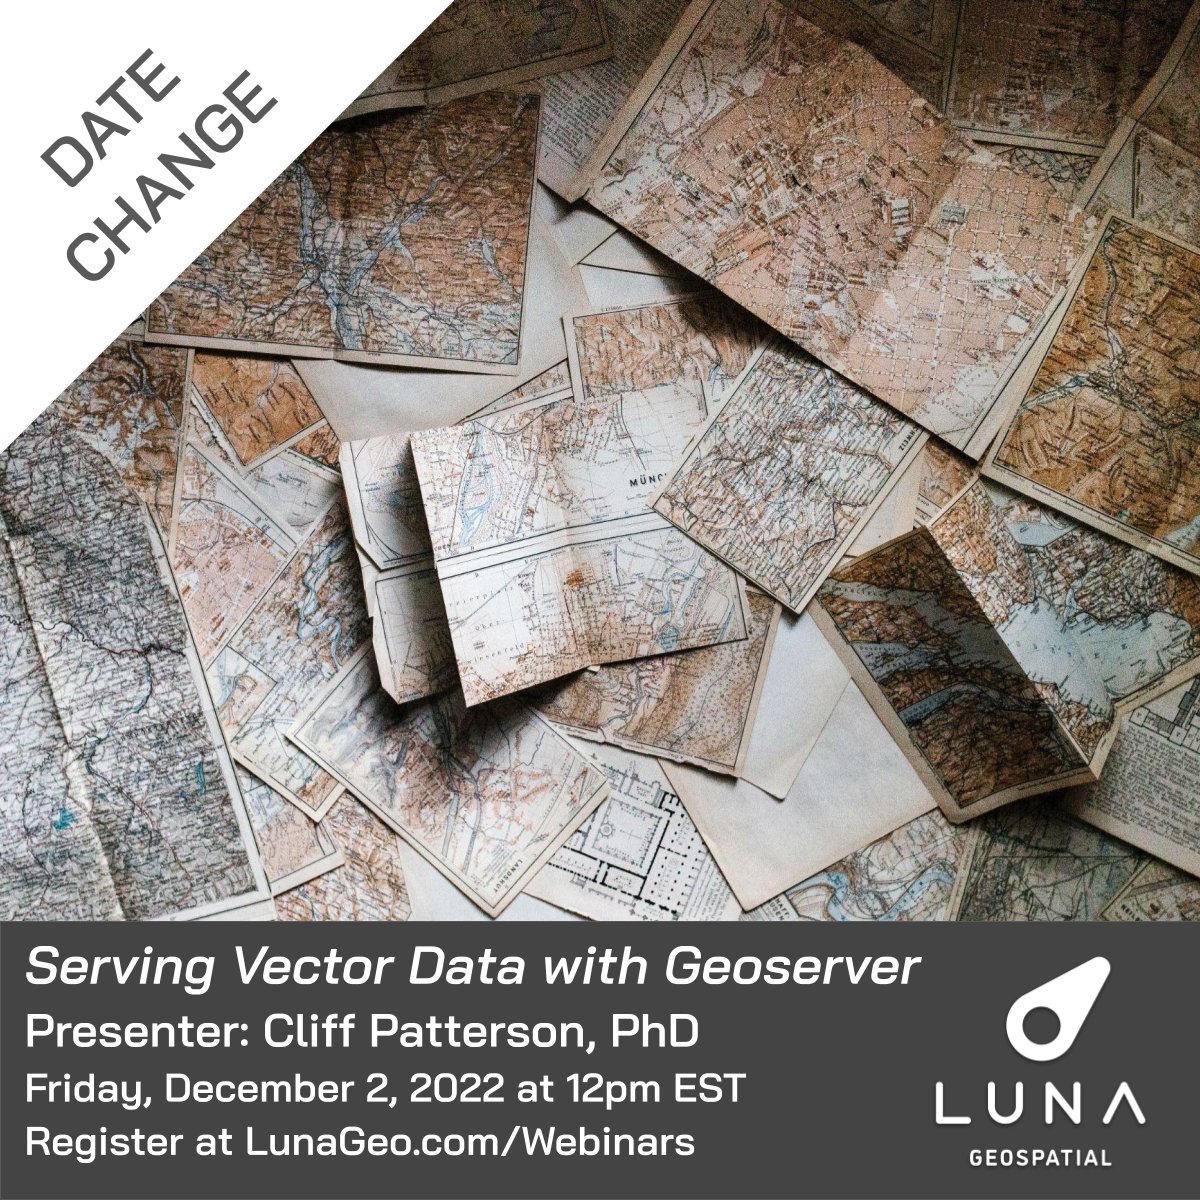 Date Change! Serving Vector Data with Geoserver presented by Cliff Patterson (@cliffpat) is now on Friday, December 2nd at 12pm Eastern. Registration is still open. lunageo.com/webinars/